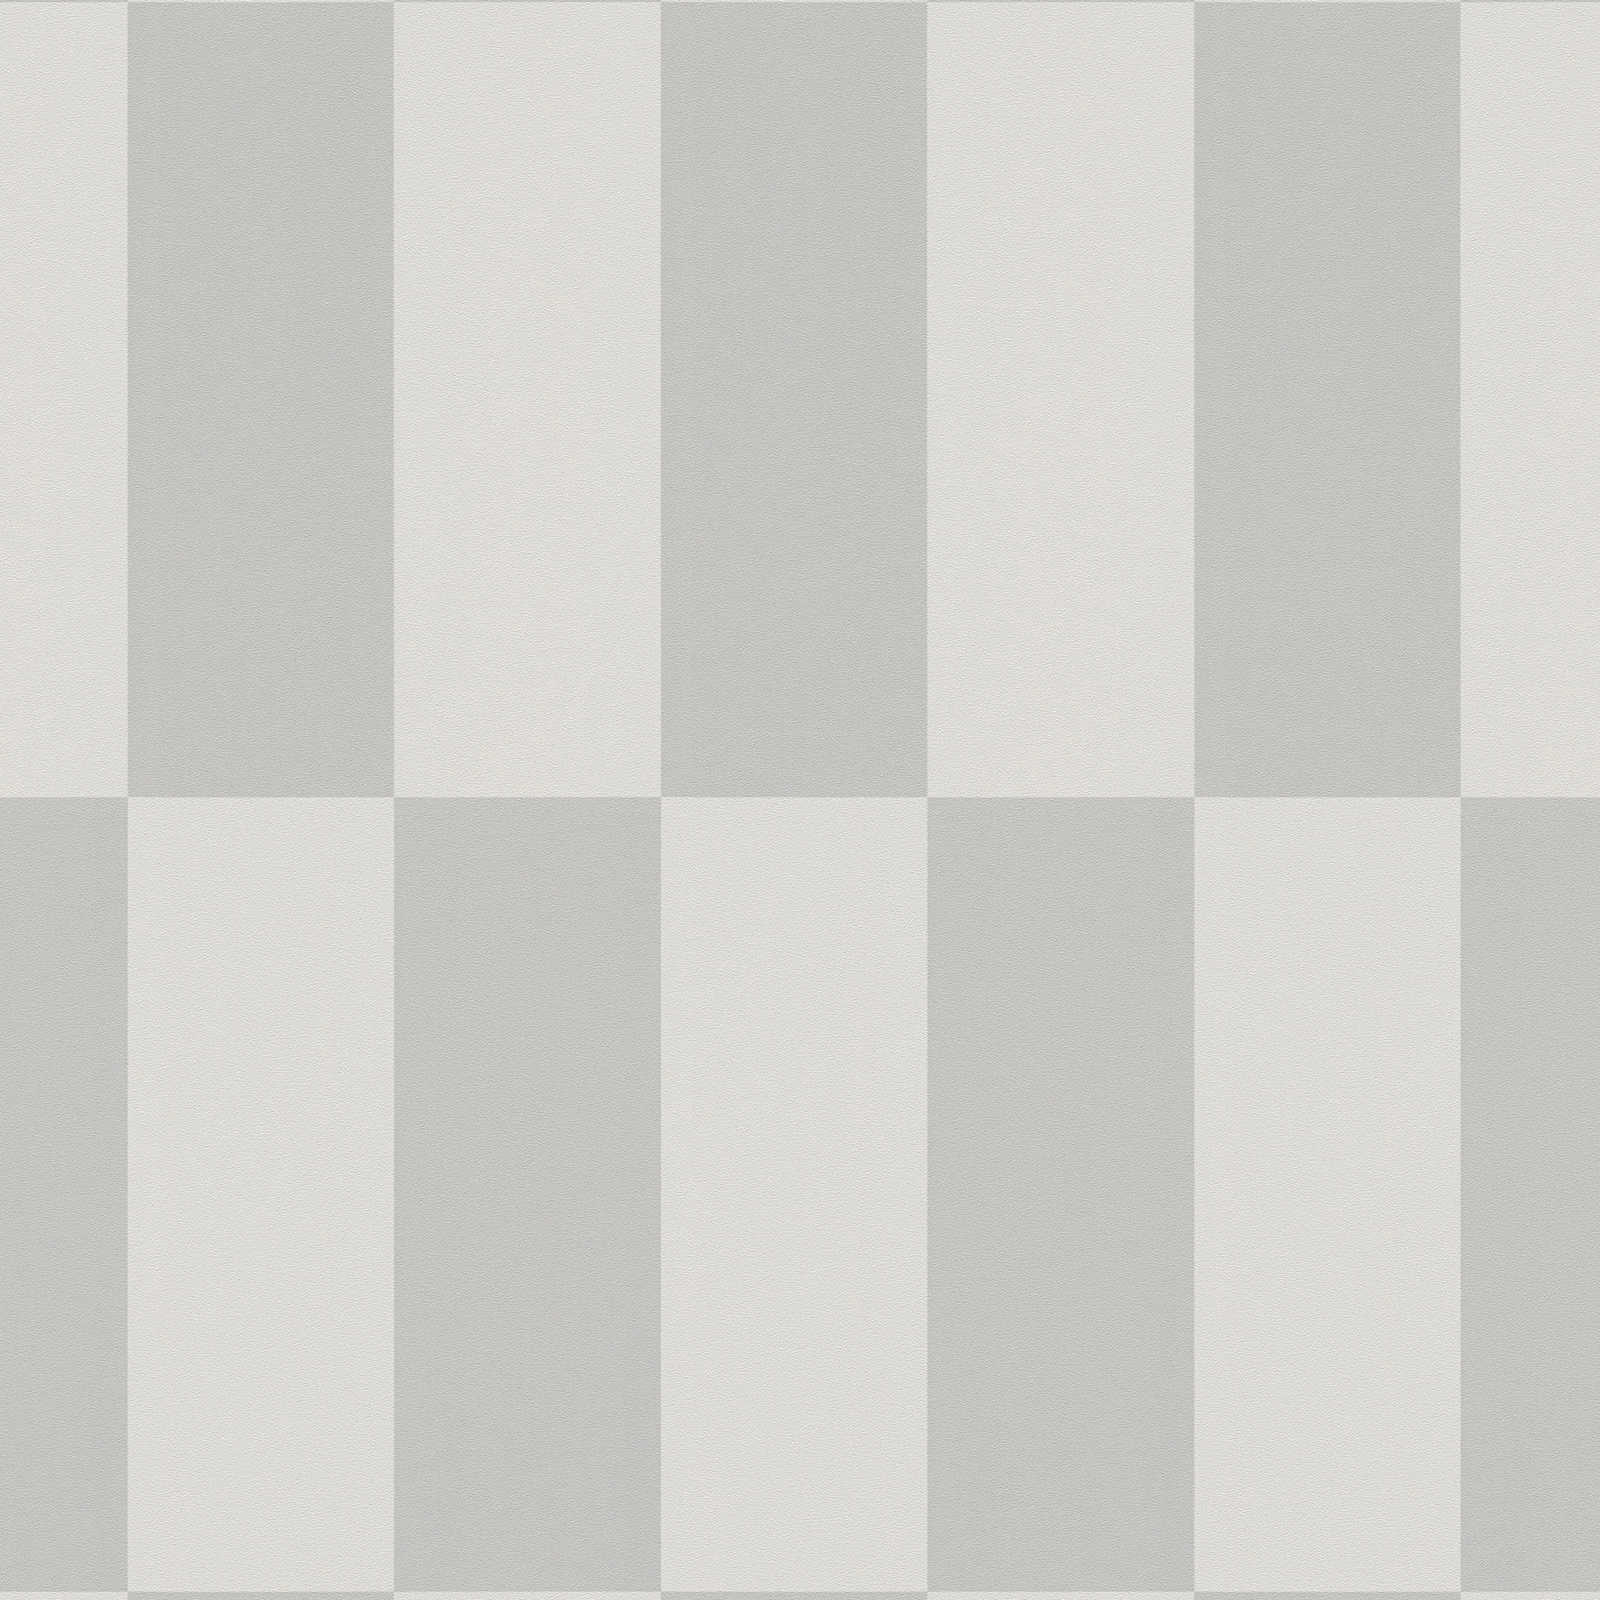             Non-woven wallpaper with graphic square pattern - grey
        